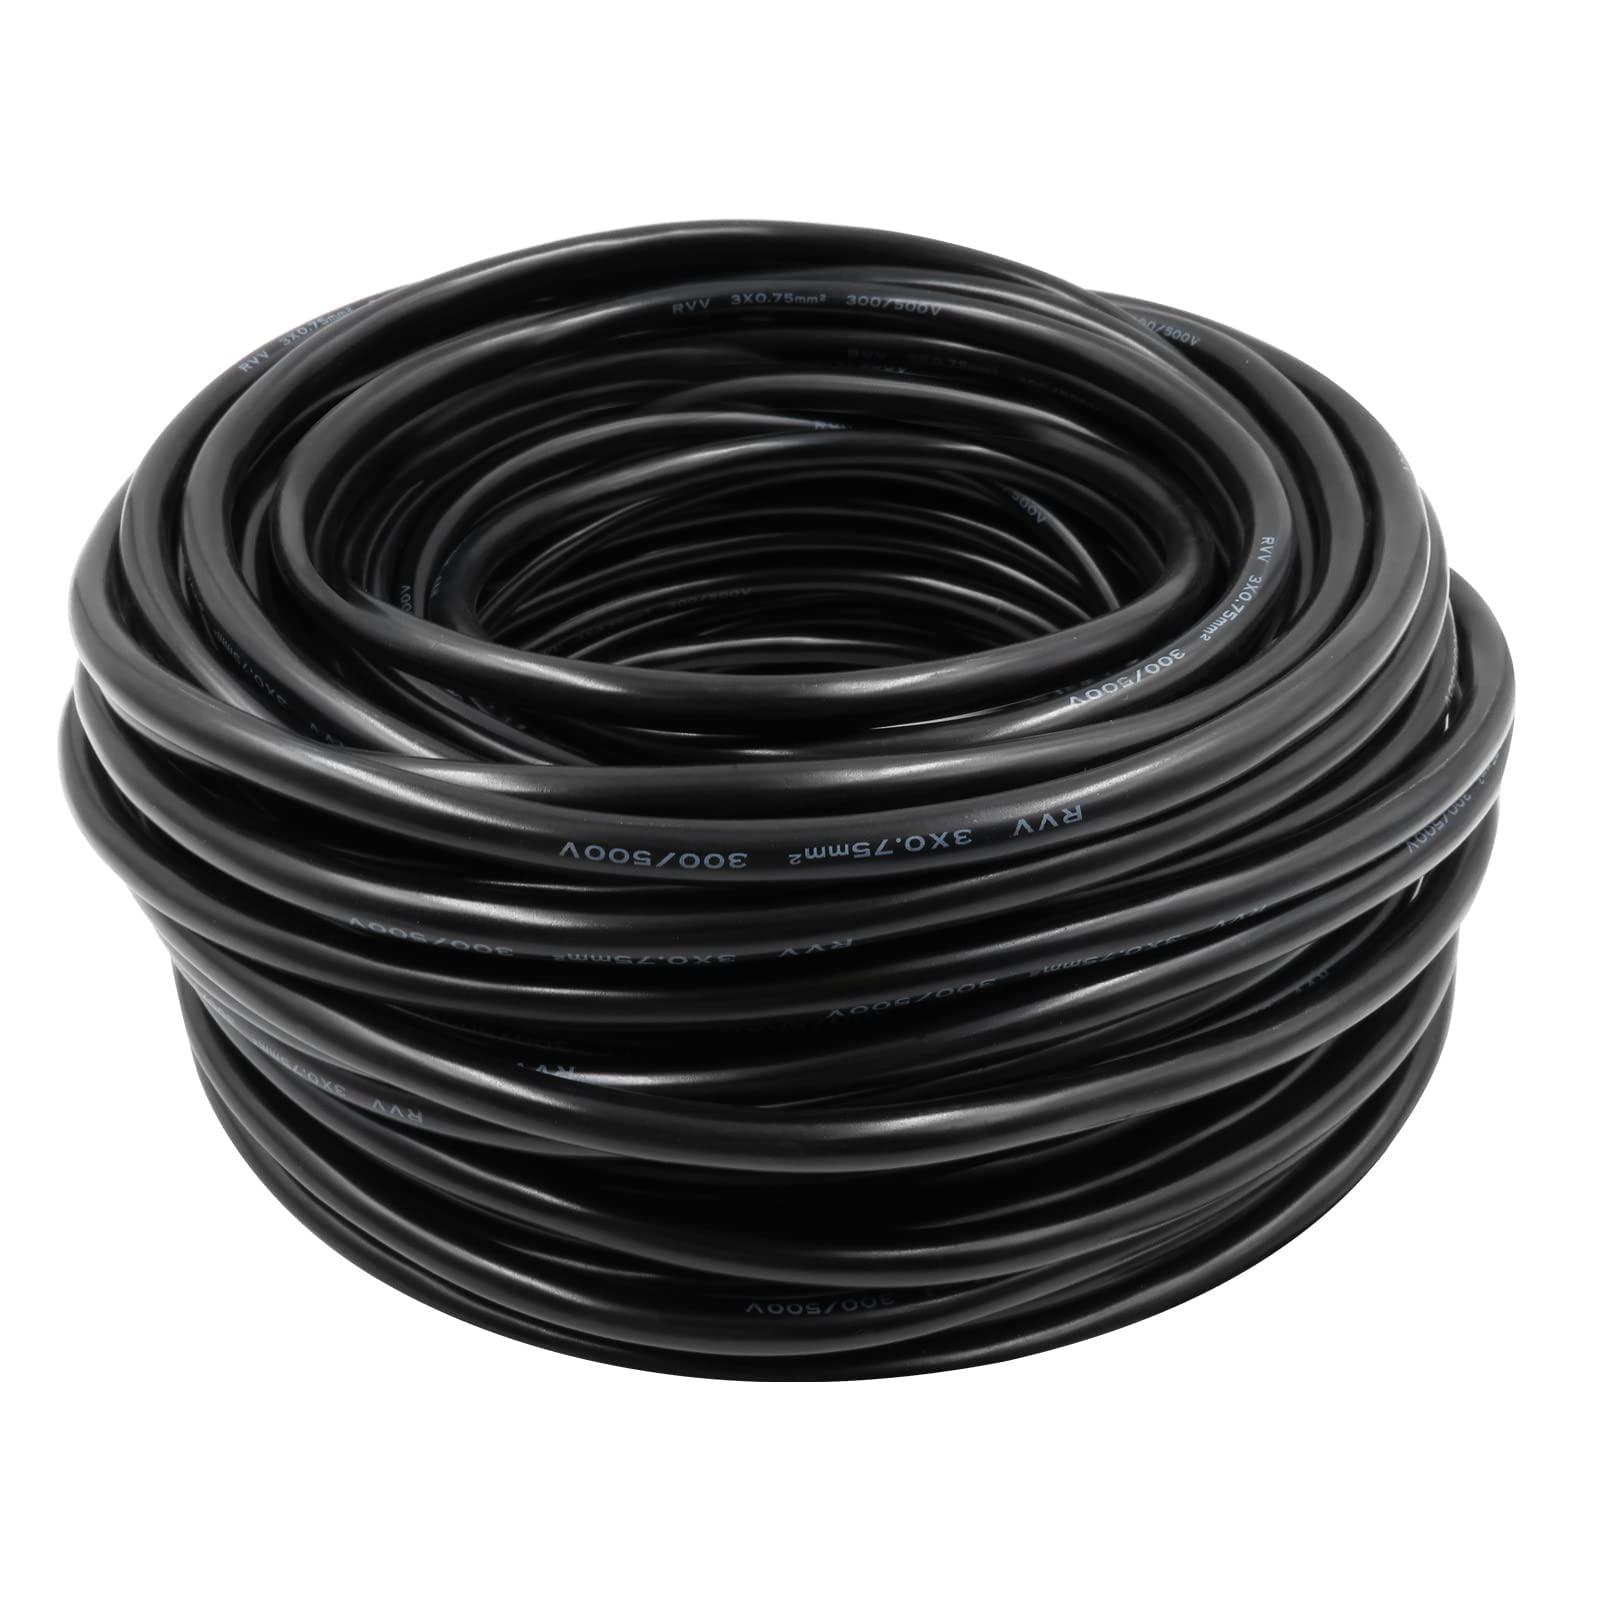 Alling rvv wire cable extension cord copper wire 3 conductor 0.75mm electric cores 100ft length black (100ft 3core blackwire) (100ft